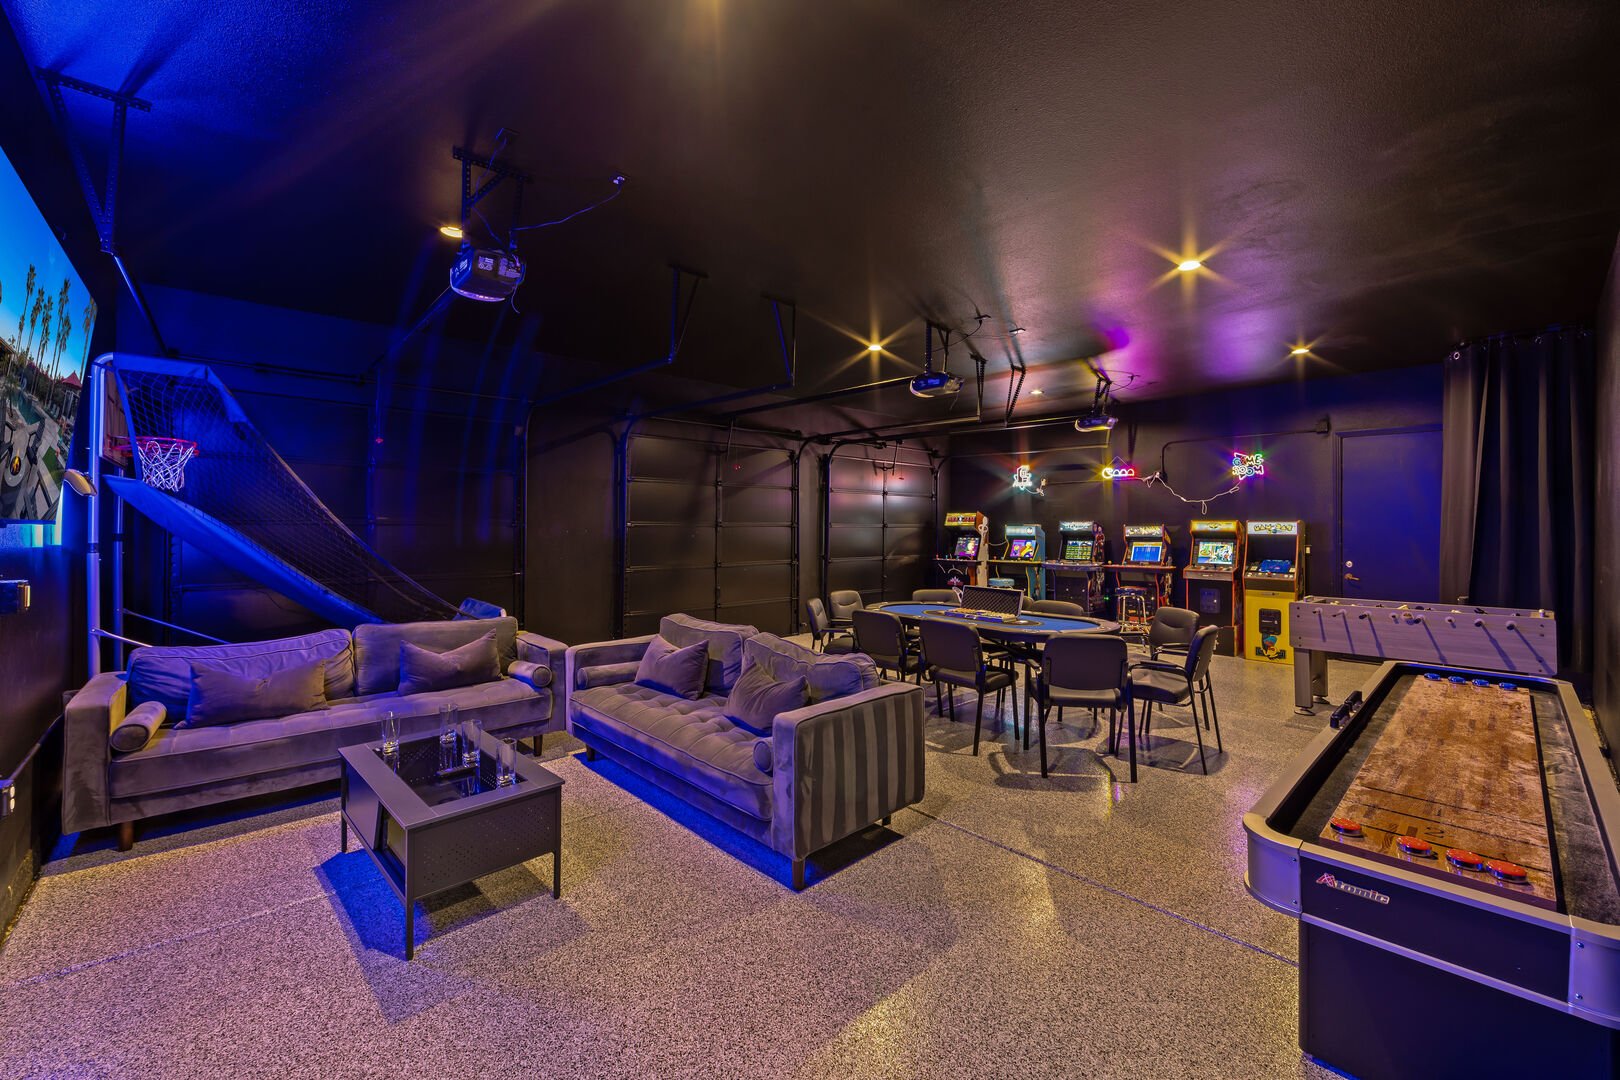 This game room features a large variety of arcades, foosball, shuffleboard, a large flat-screen TV, and a poker table!